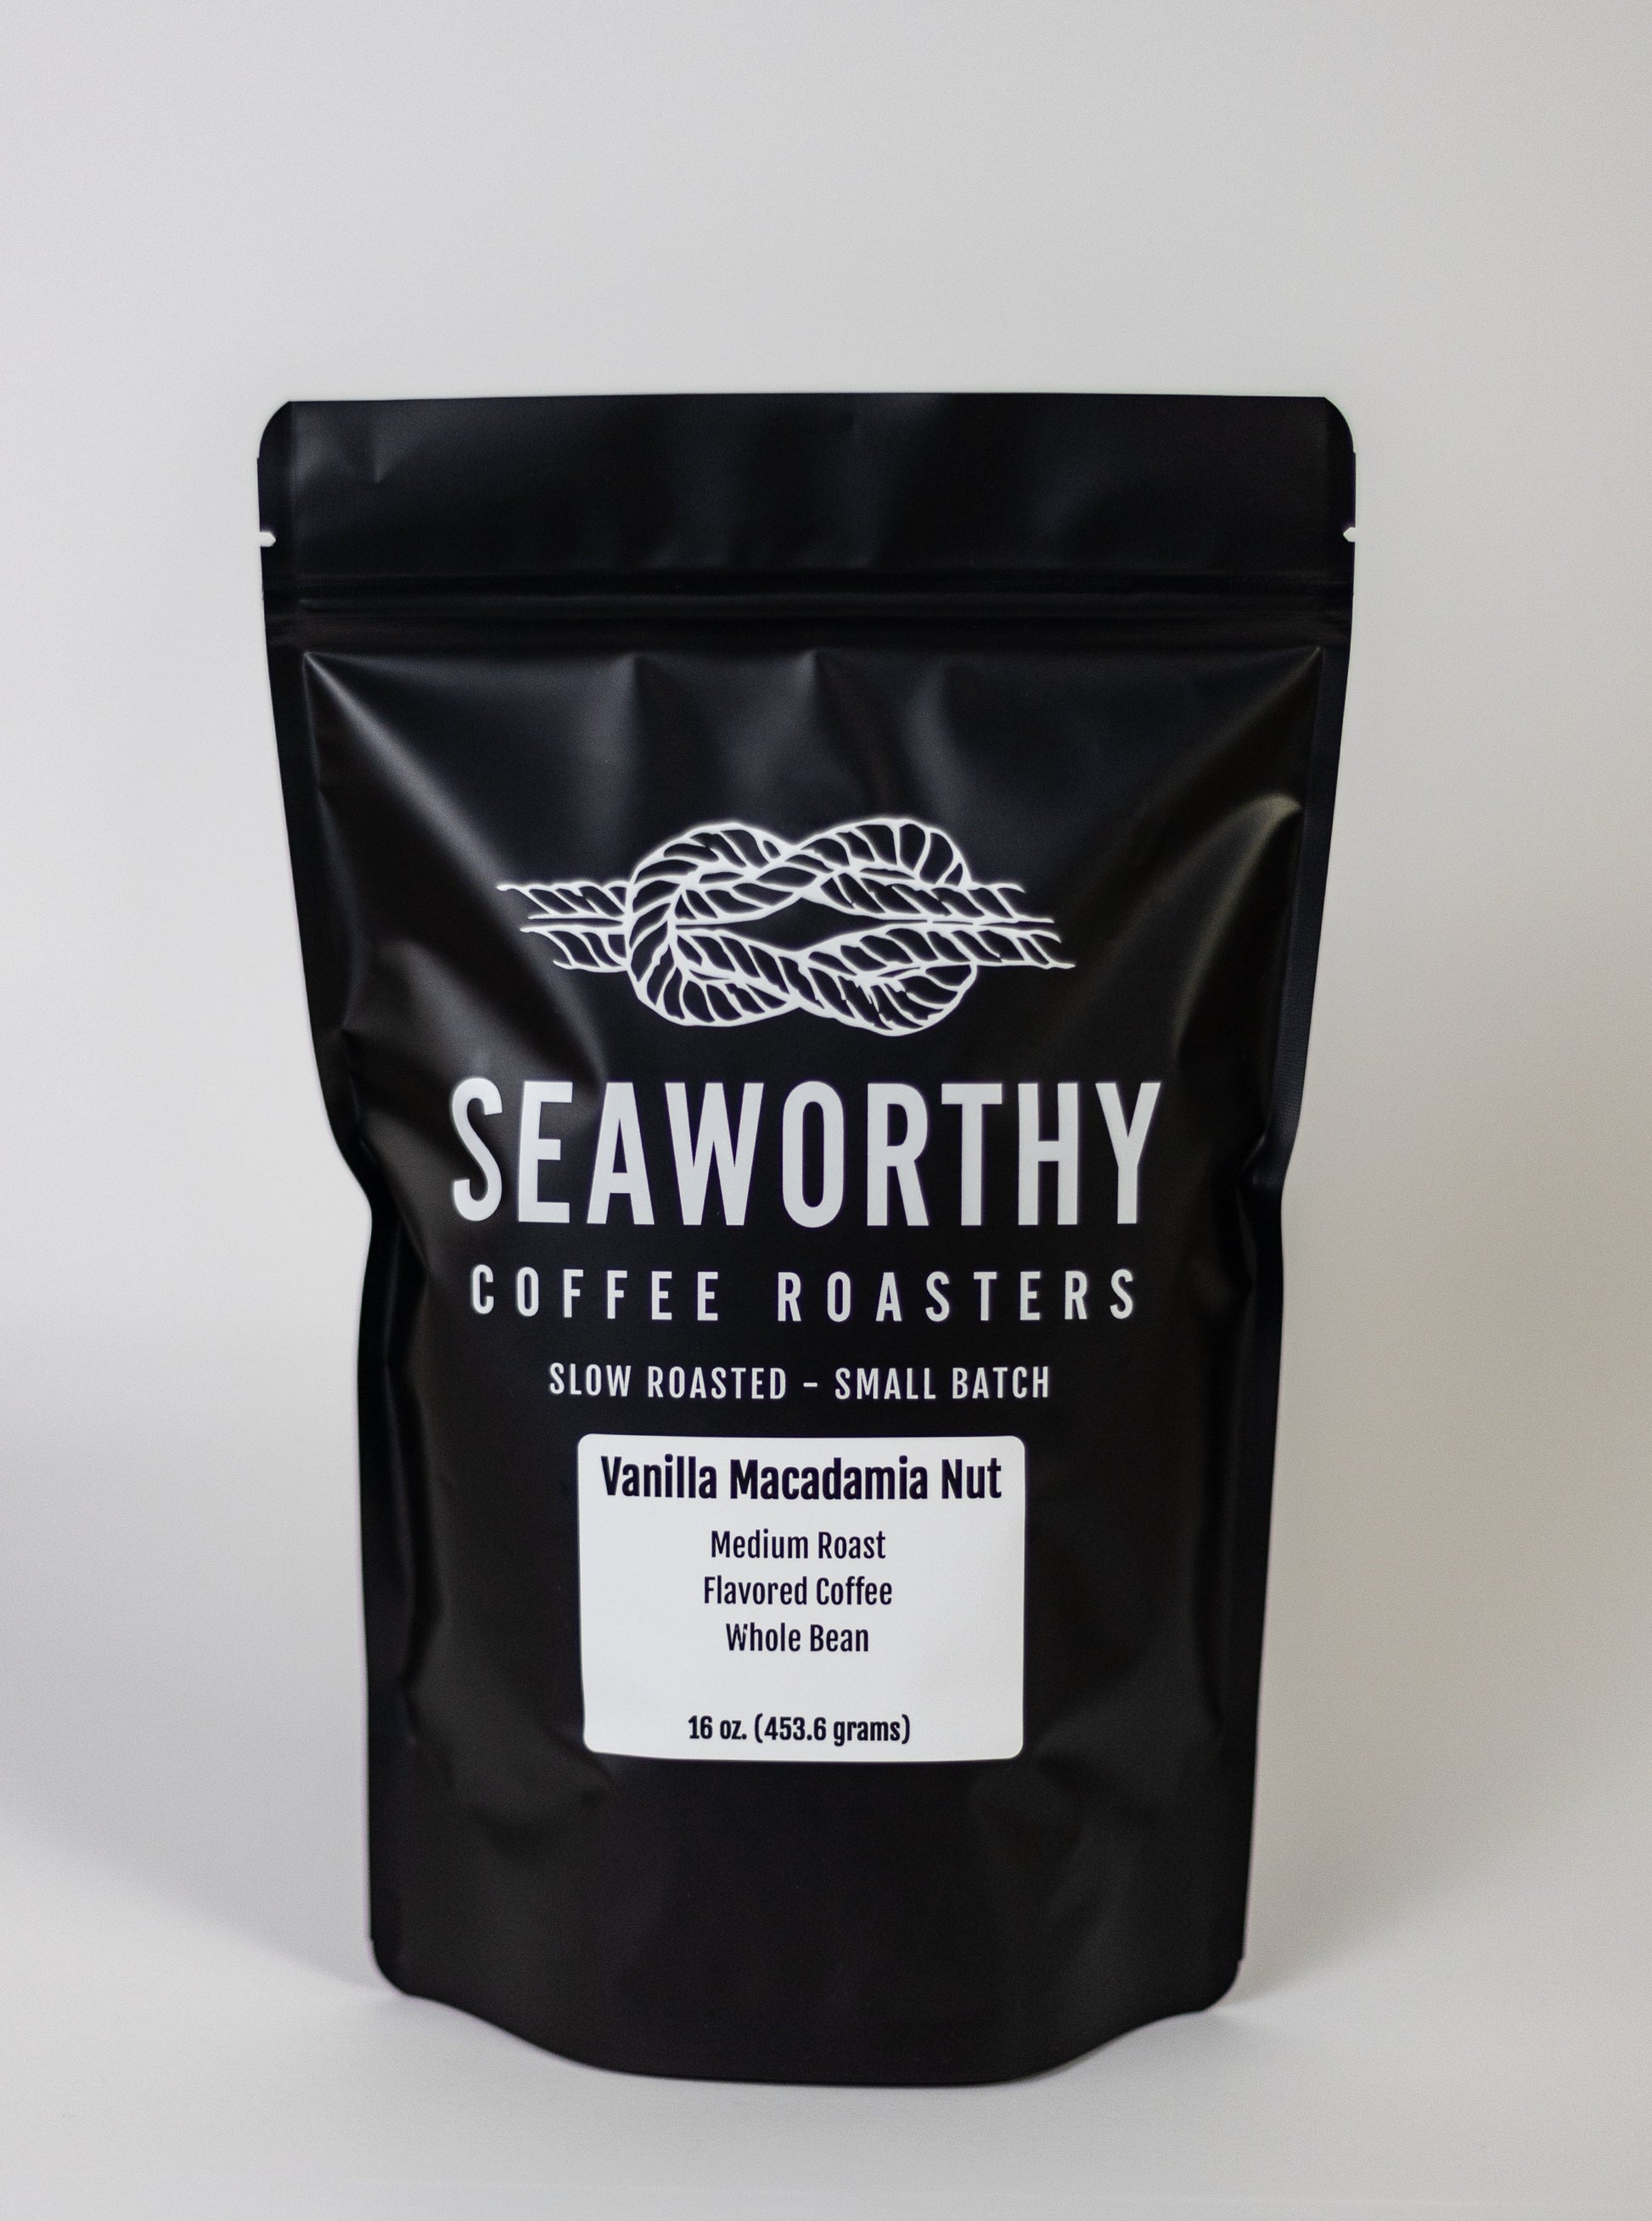 Seaworthy slow roasted, small batch, low acid coffee. 1 pound bag of Vanilla Nut flavored coffee.